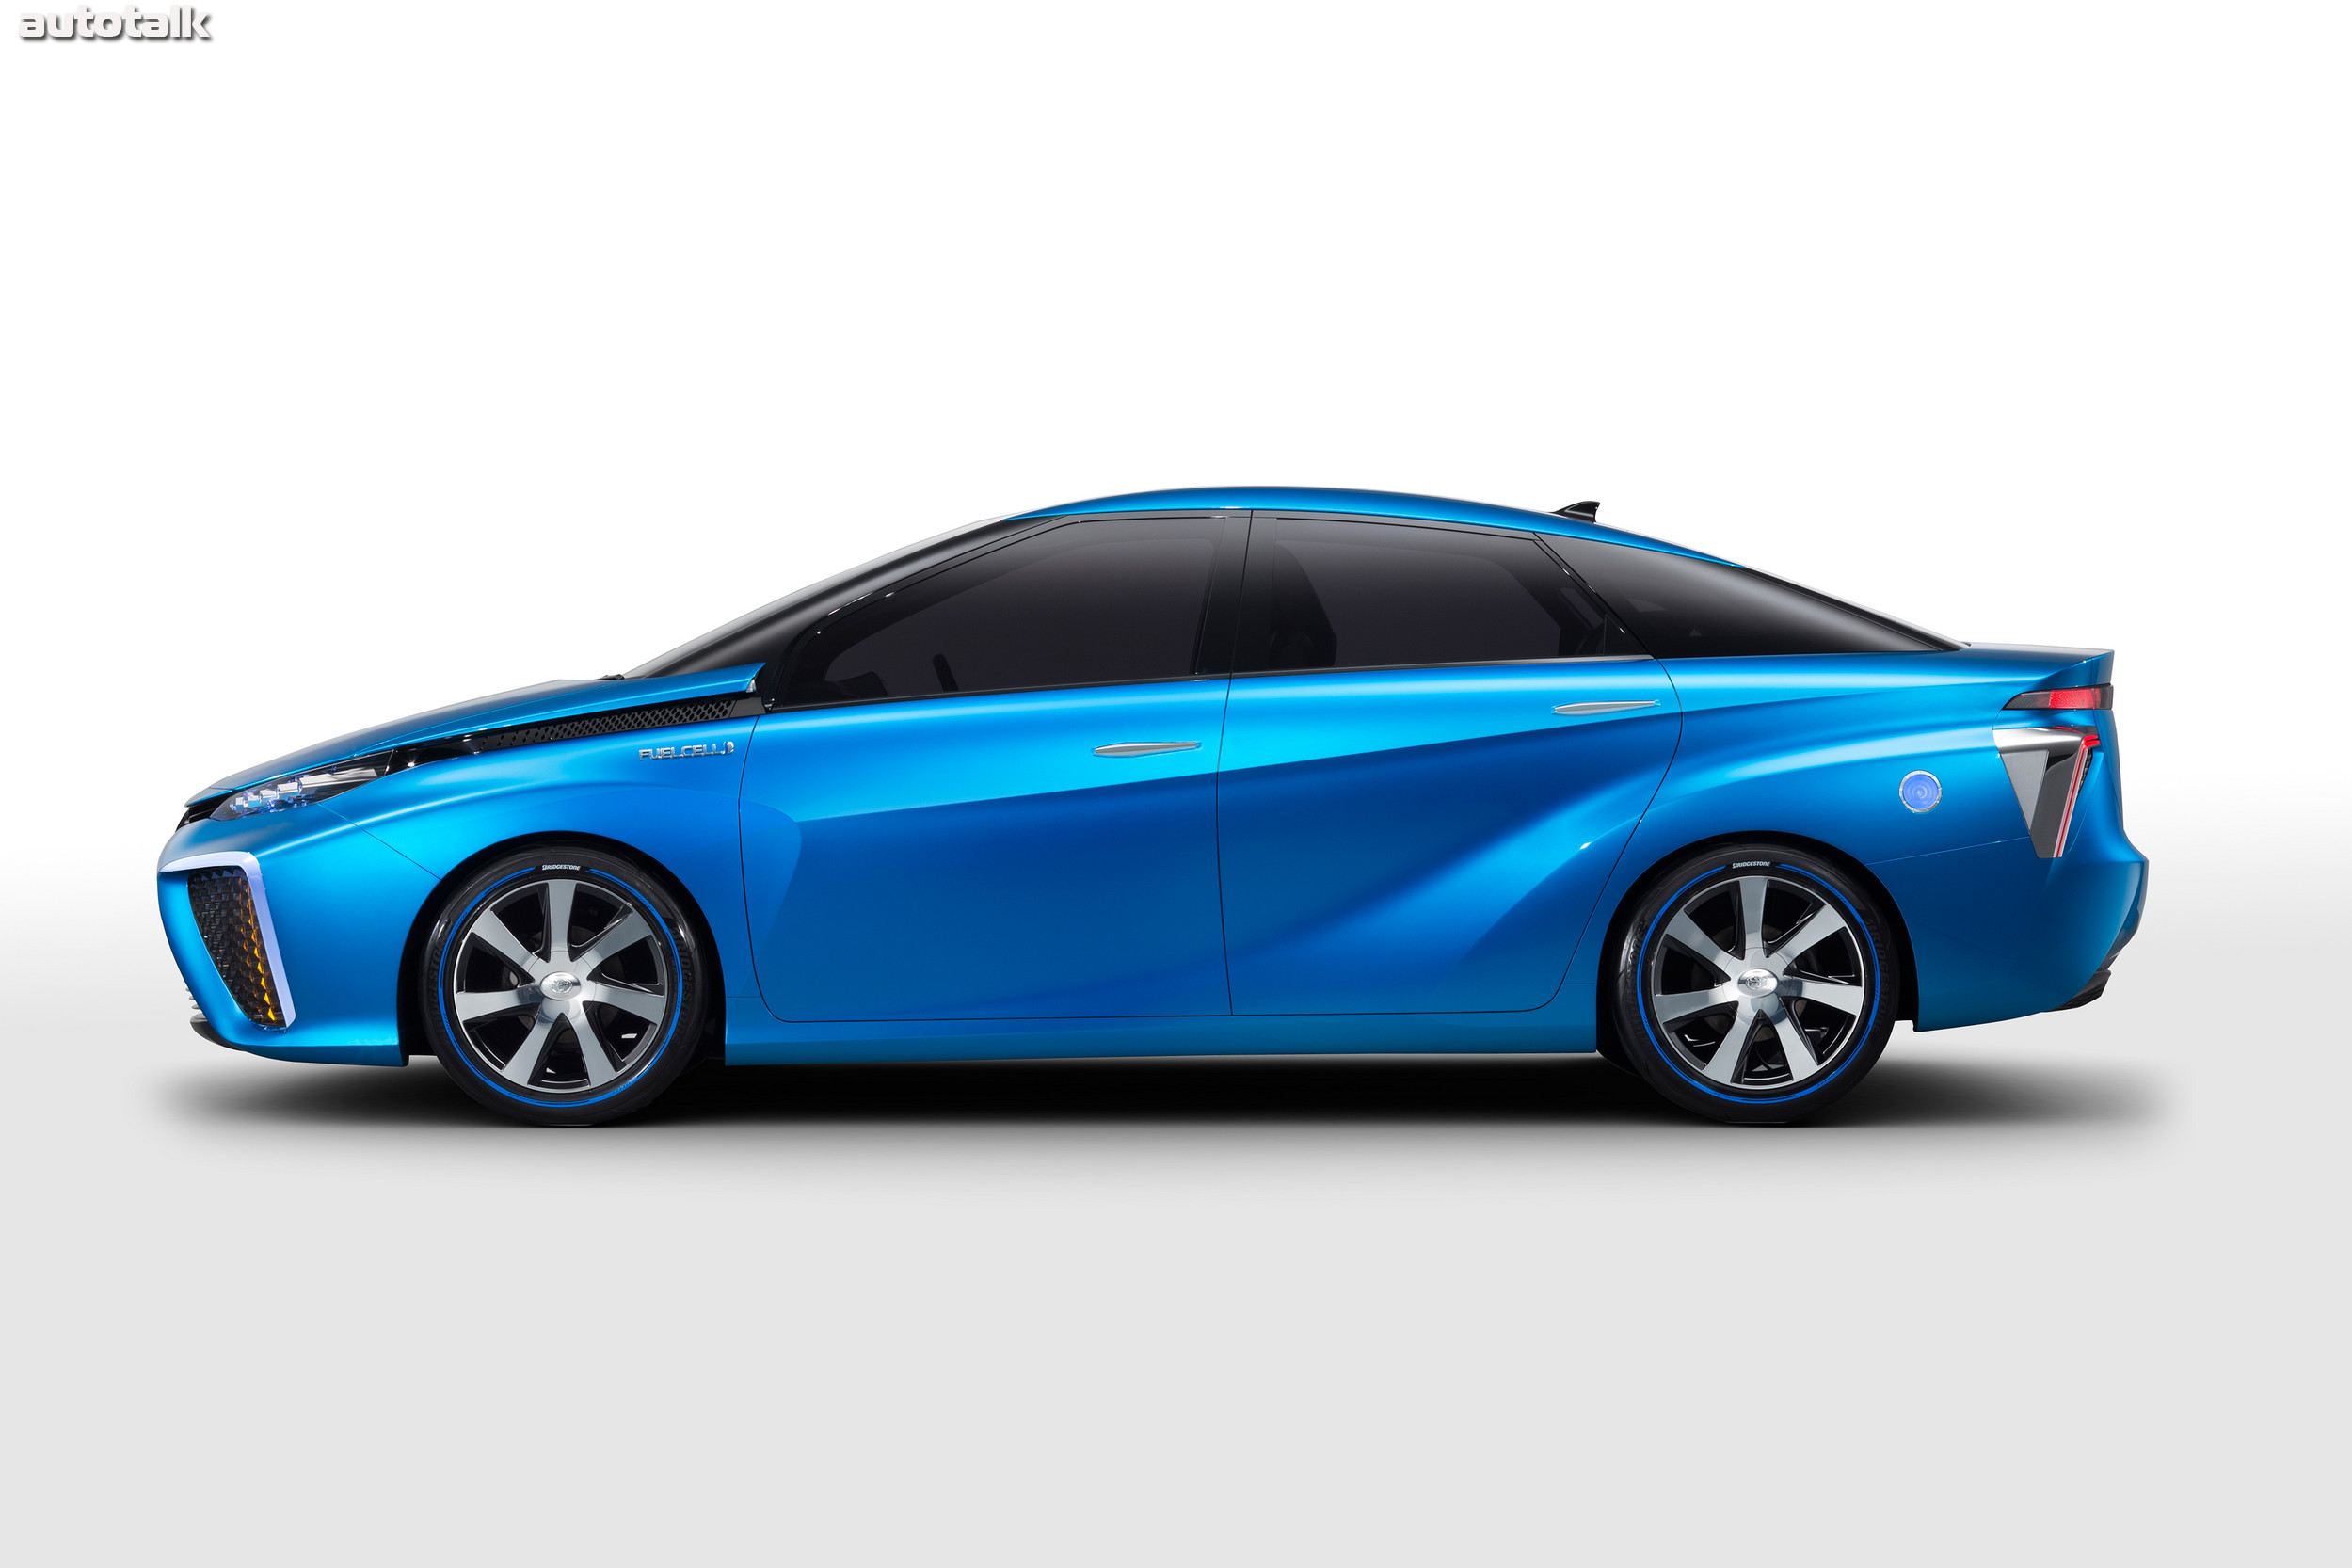 2014 Toyota Fuel Cell Vehicle Concept